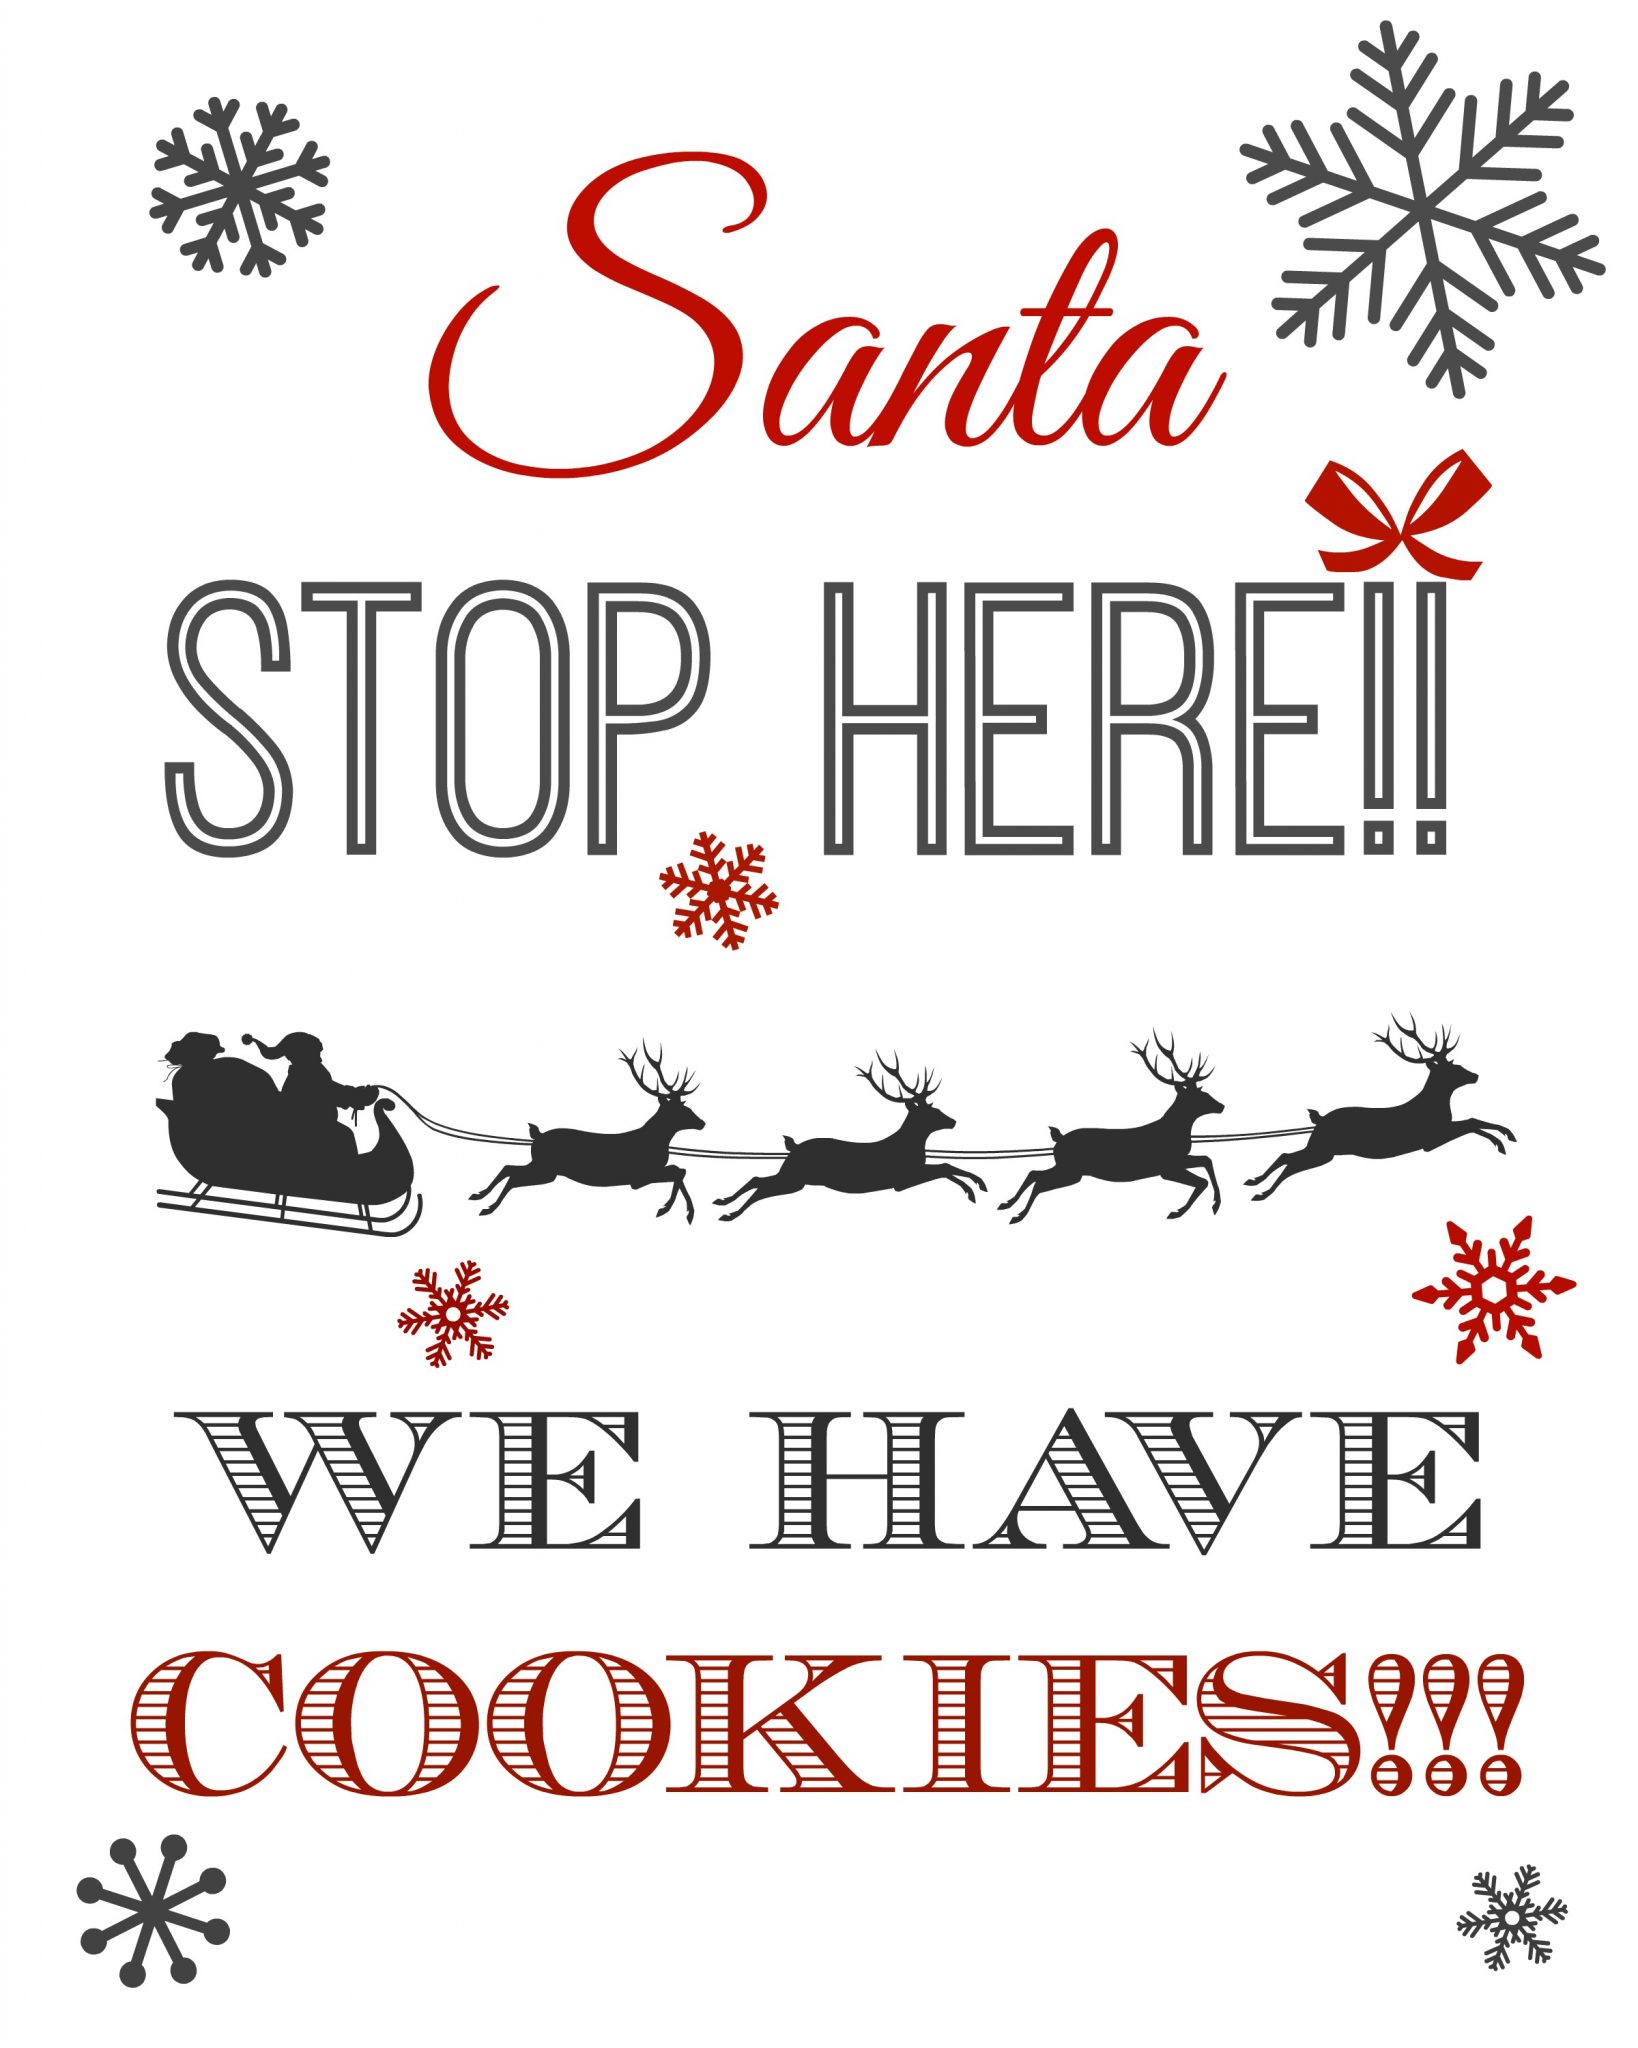 Free Printable Christmas Eve Milk and Cookies Sign for Santa! The